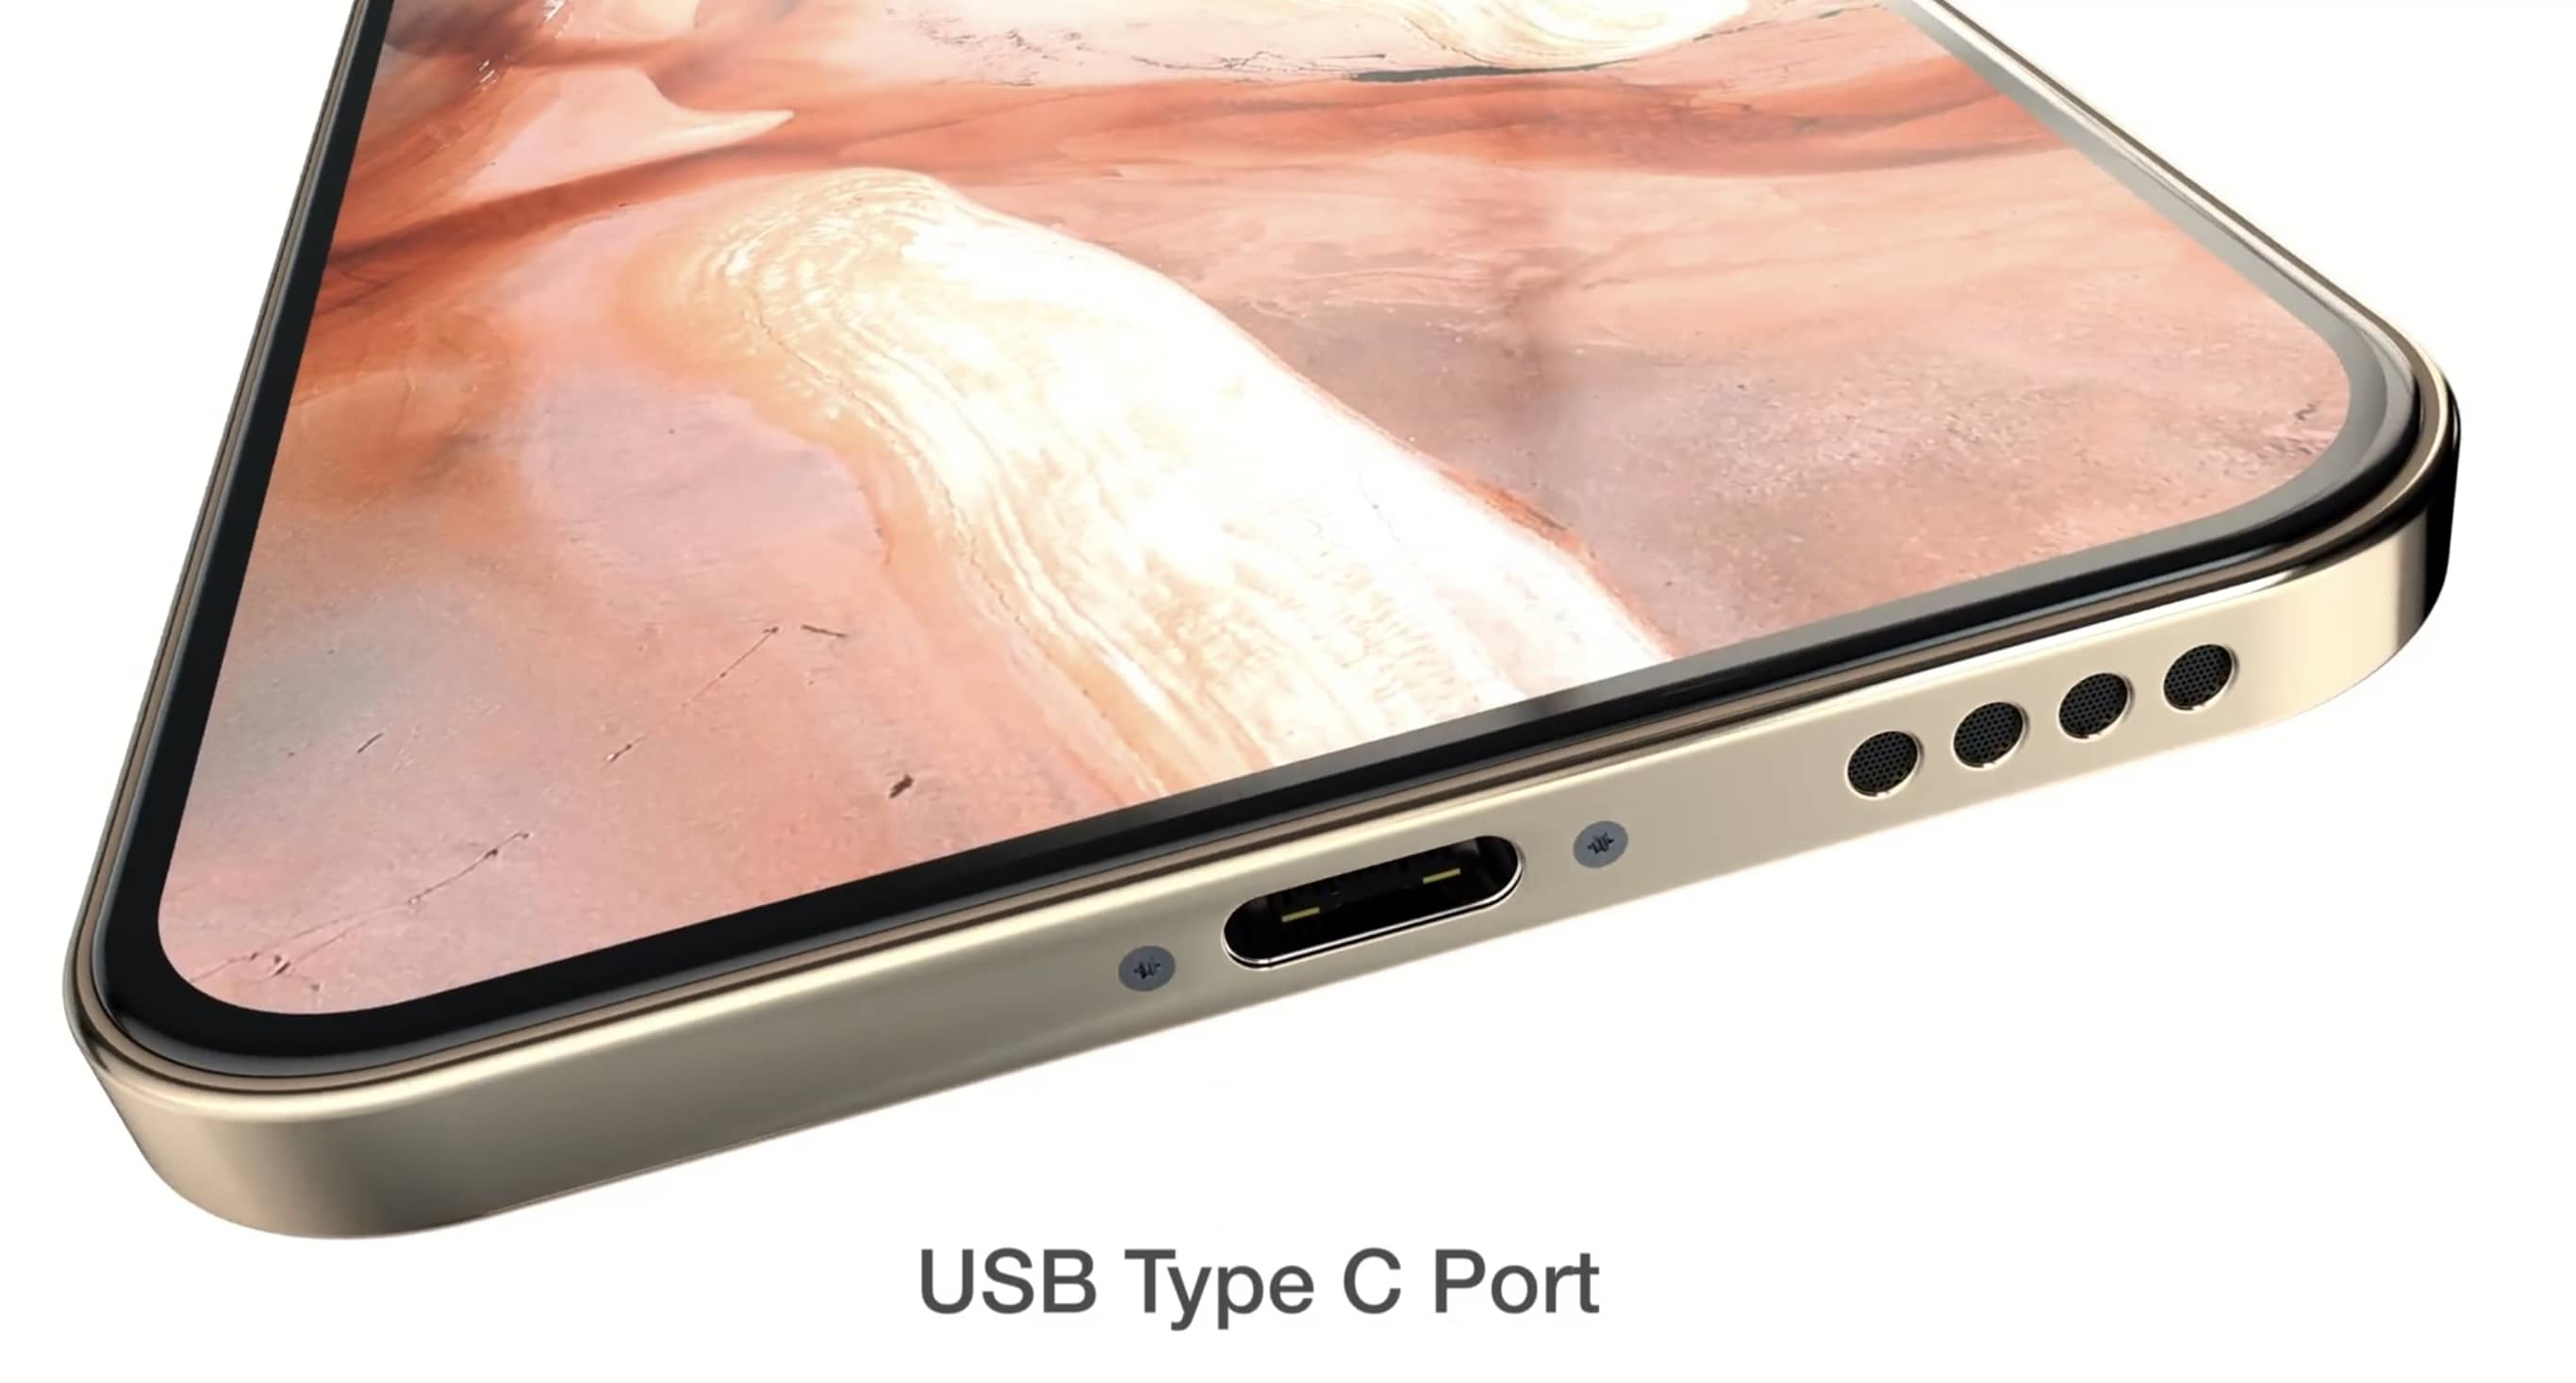 A USB-C port is one of the features rumored to be part of the 2019 iPhone.